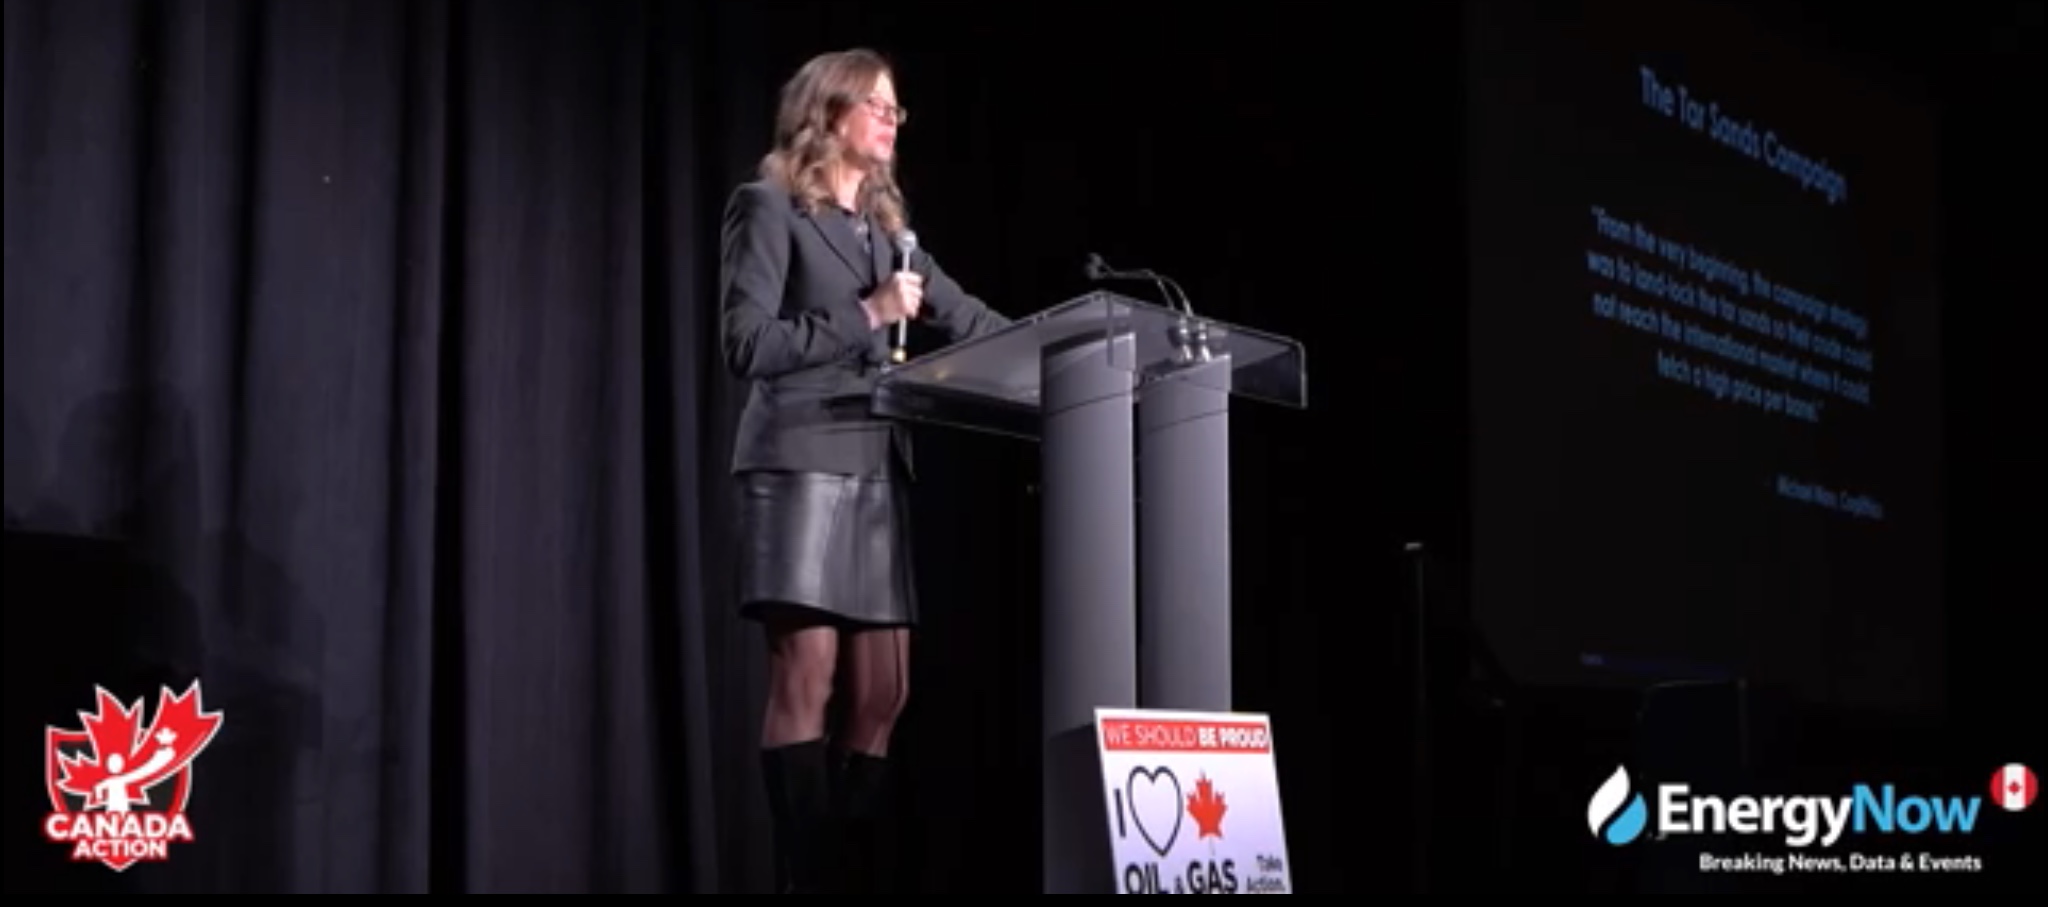 B.C. Researcher Vivian Krause speaks to the Indian Resource Council in Calgary on Jan. 16, 2019. YouTube screenshot.